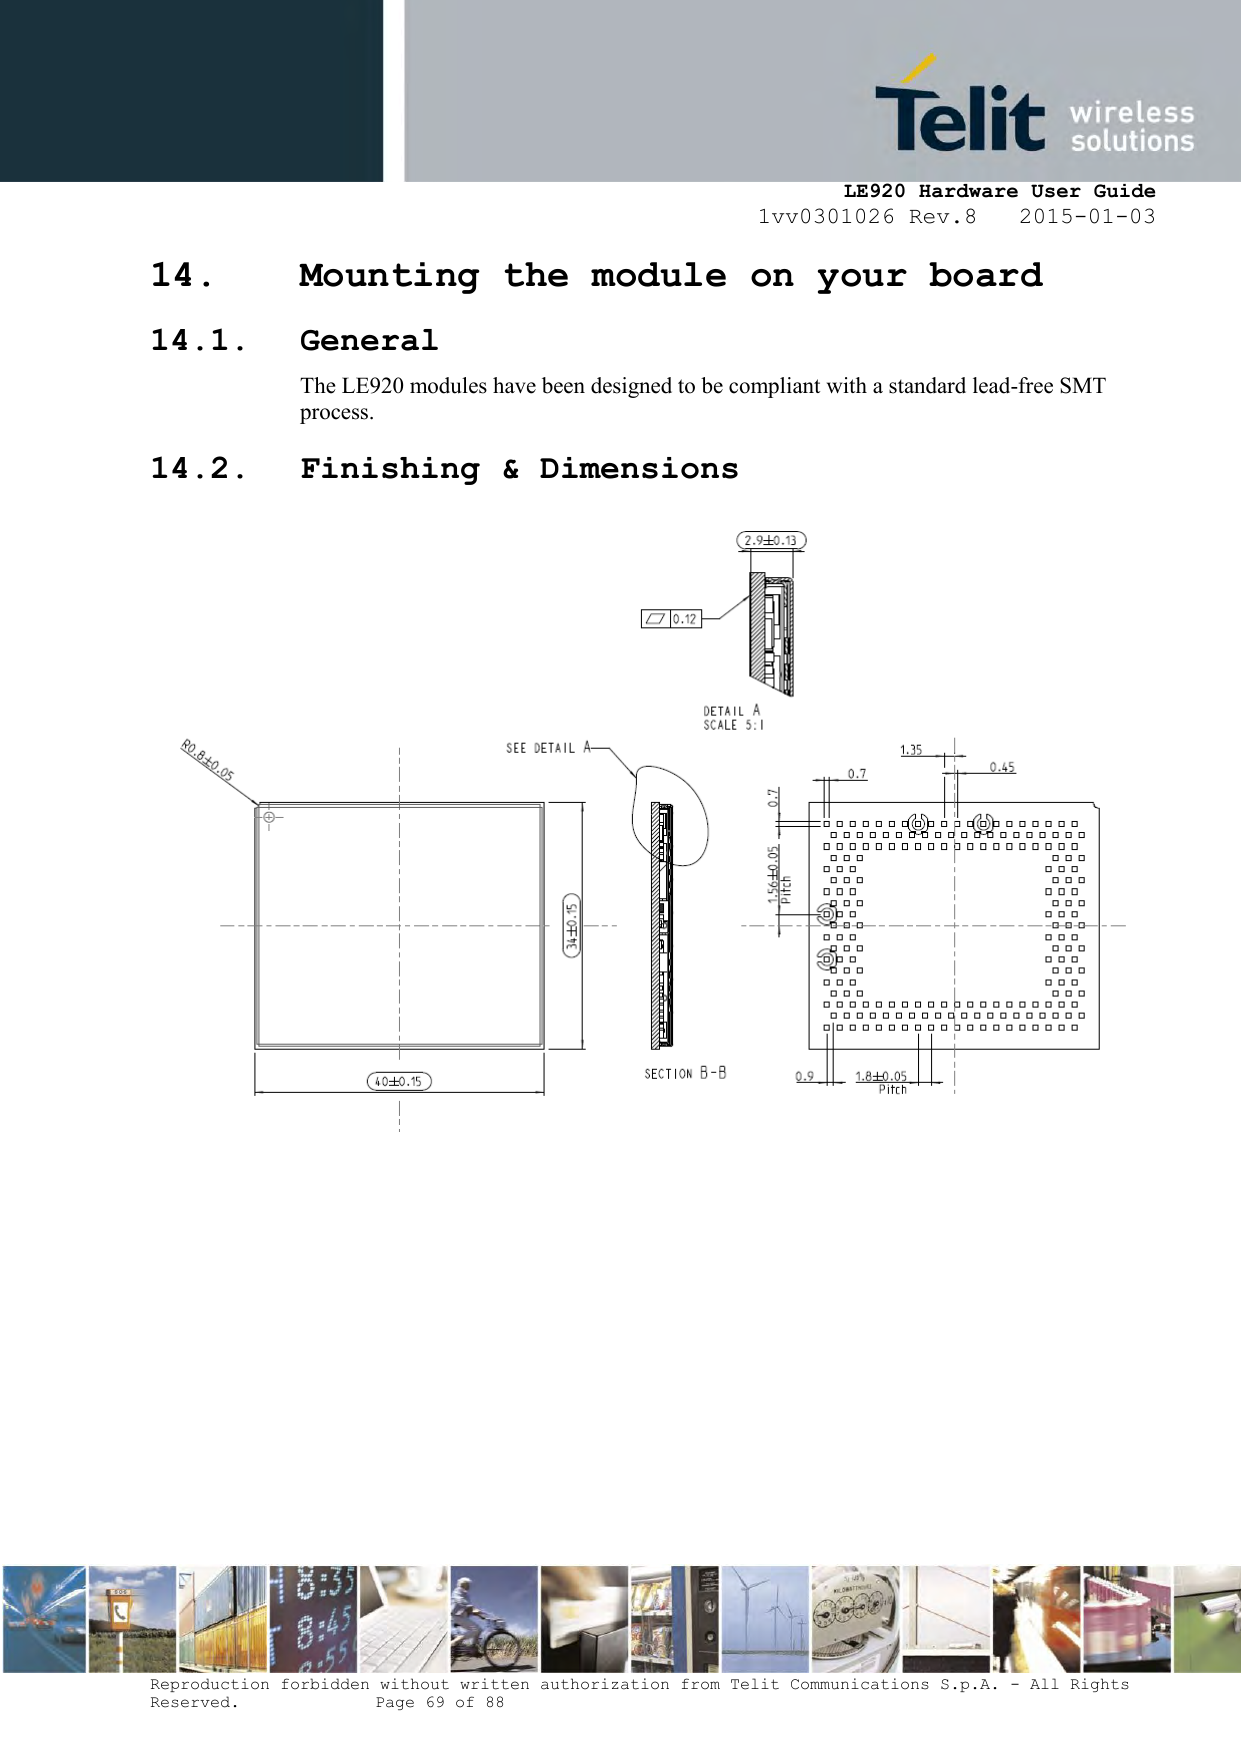     LE920 Hardware User Guide 1vv0301026 Rev.8   2015-01-03 Reproduction forbidden without written authorization from Telit Communications S.p.A. - All Rights Reserved.    Page 69 of 88  14. Mounting the module on your board 14.1. General The LE920 modules have been designed to be compliant with a standard lead-free SMT process.  14.2. Finishing &amp; Dimensions             